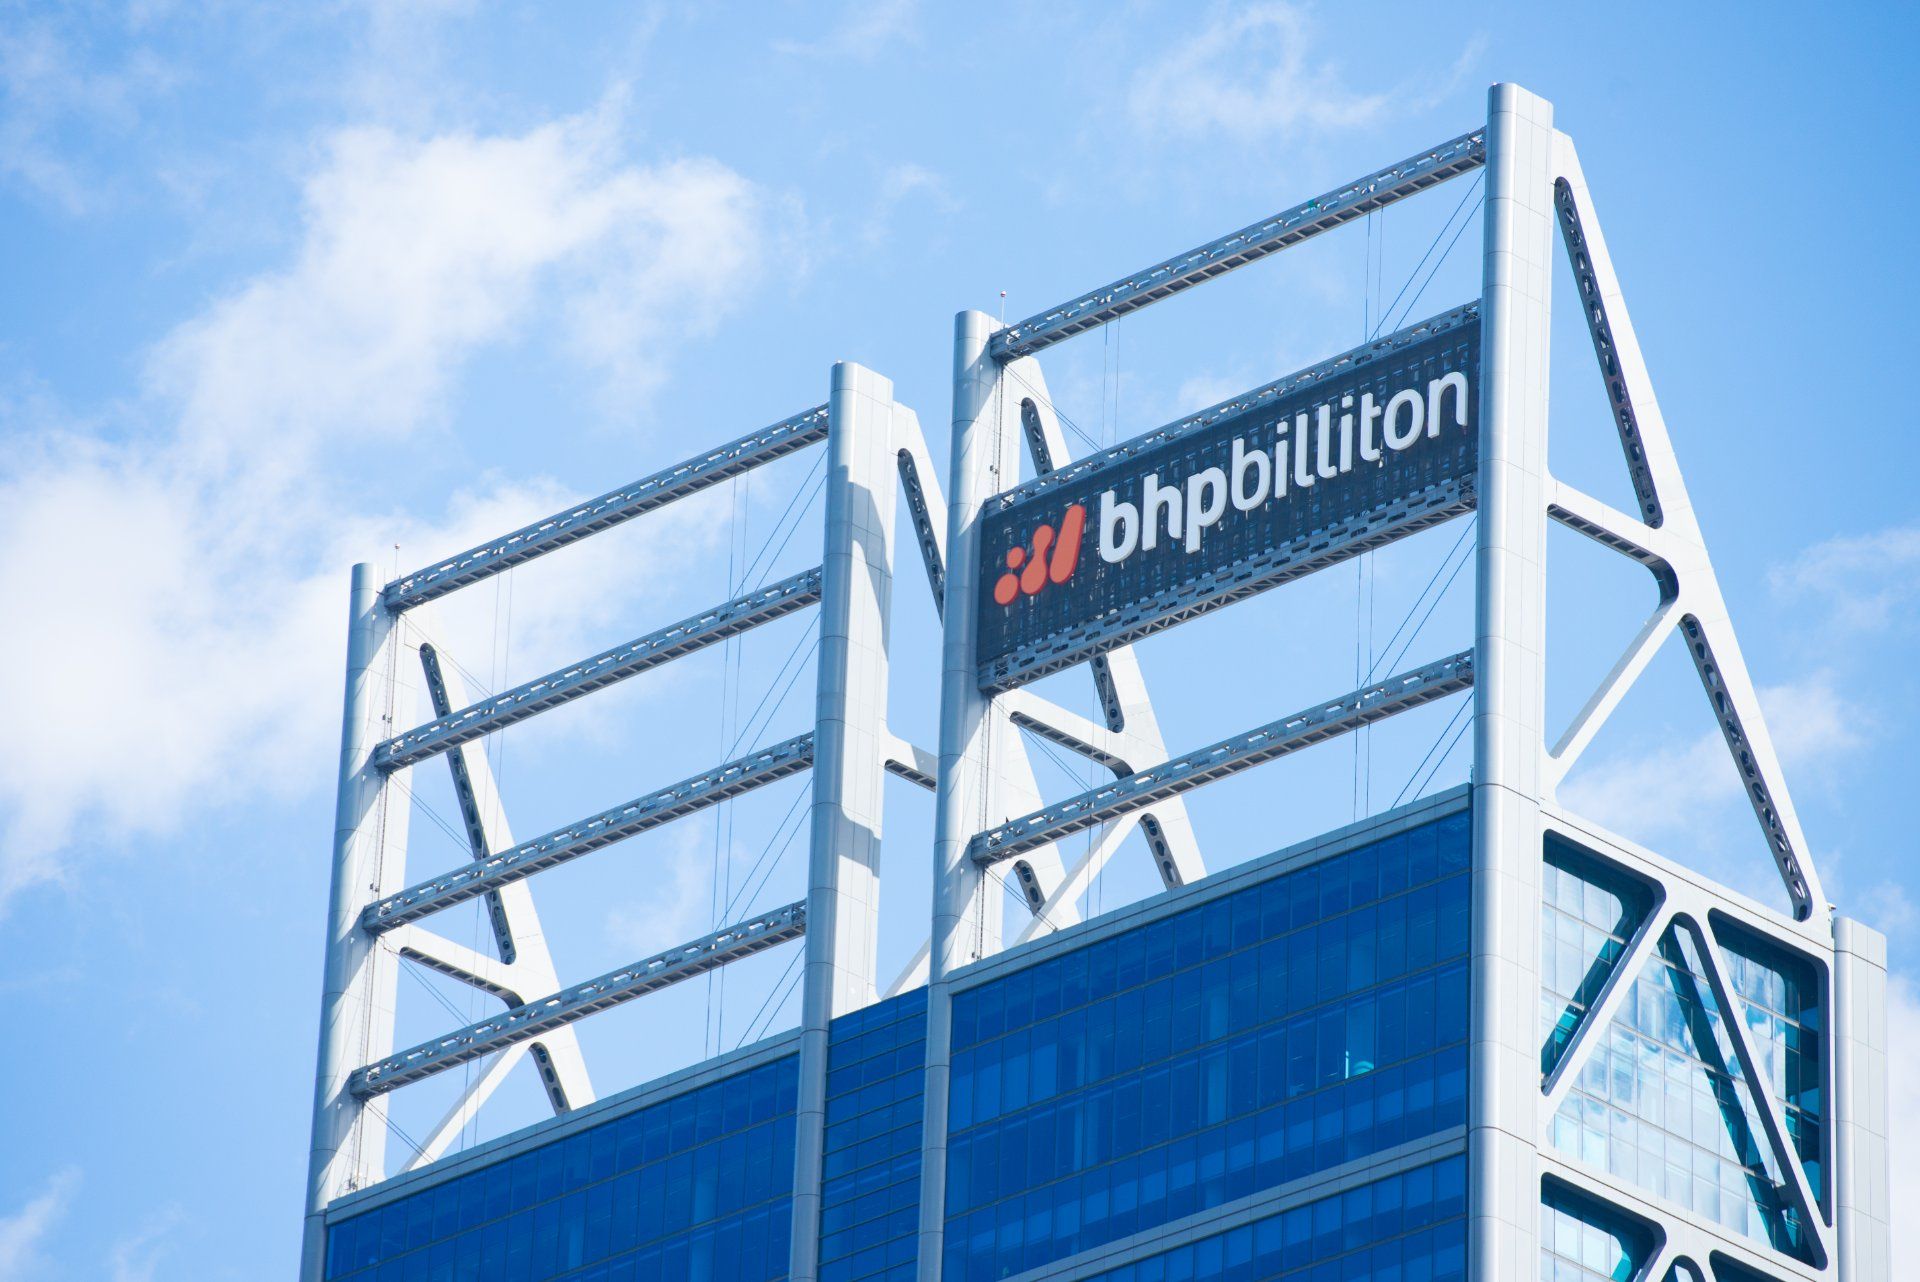 BHP Billiton sign on top of office building